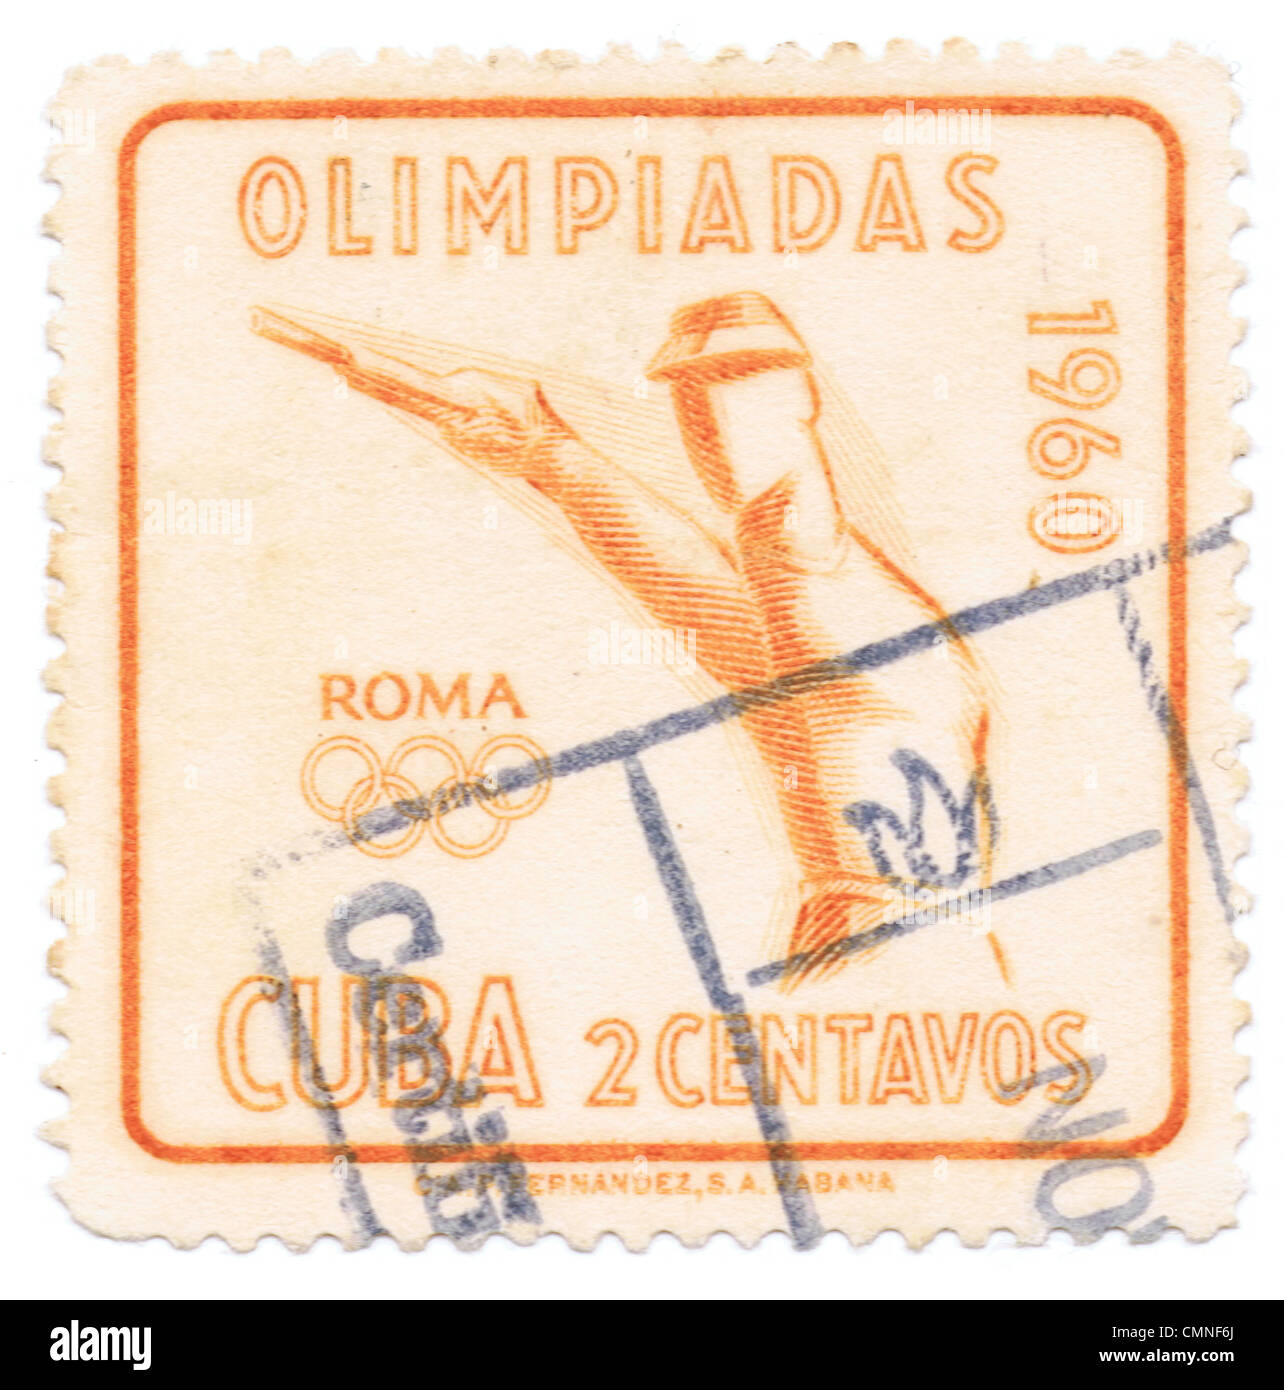 Cuban postage stamp commemorating the 1960 Summer Olympics, officially known as the Games of the XVII (17th) Olympiad, was an international multi-sport event held from August 25 to September 11, 1960 in Rome, Italy Stock Photo